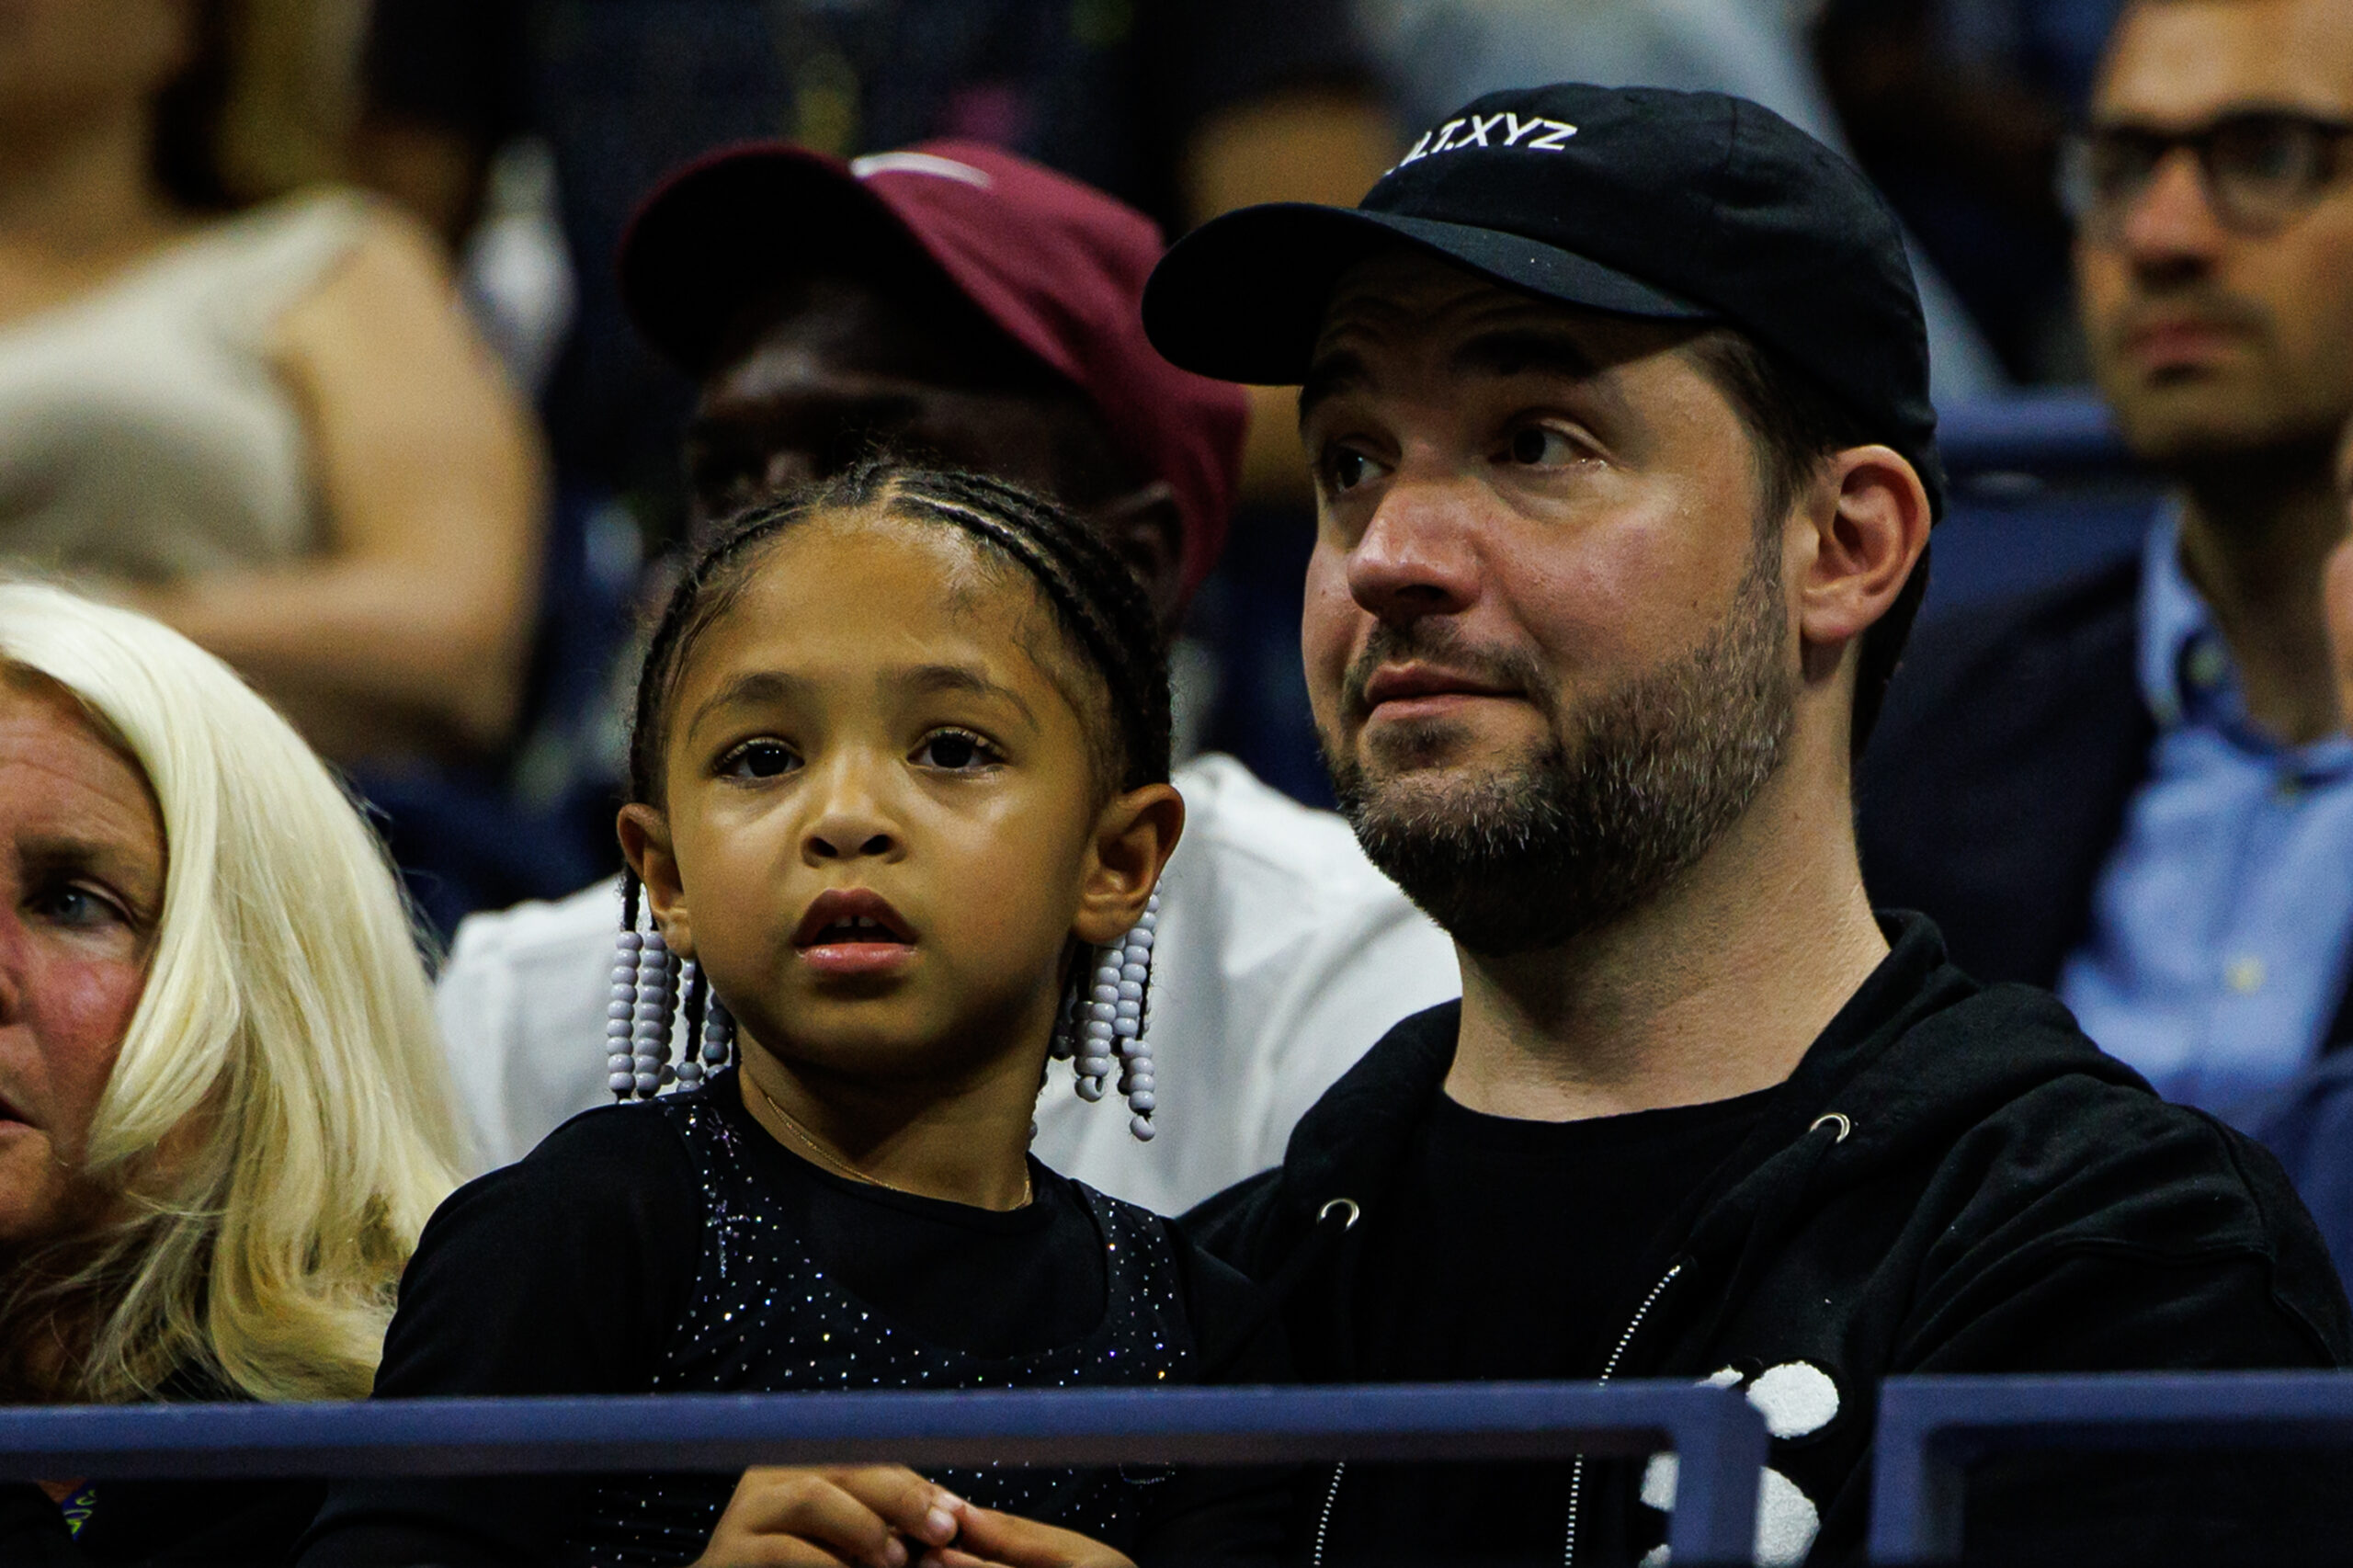 Serena Williams And Daughter Olympia Were Twinning In Matching Outfits At The US Open